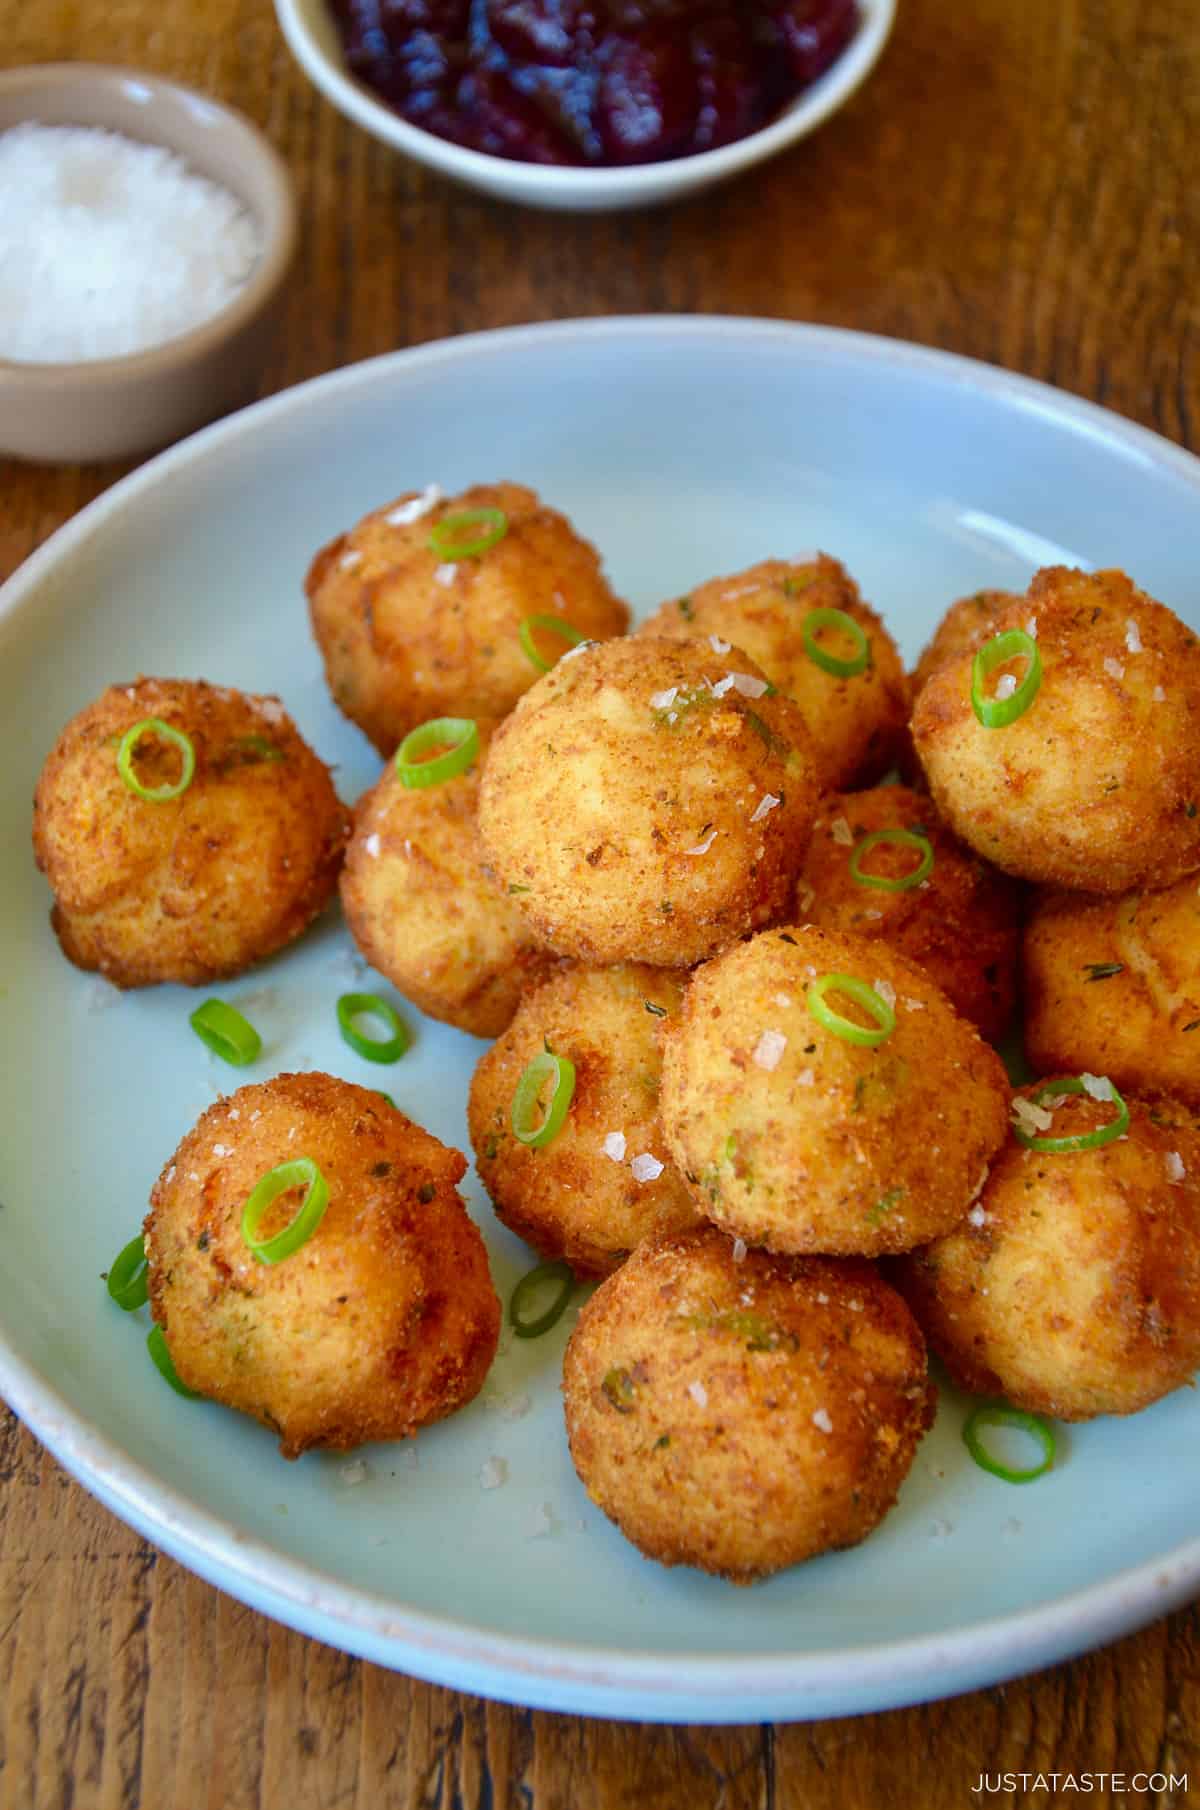 Crispy potato croquettes garnished with chopped scallions, salt and pepper on a blue plate.